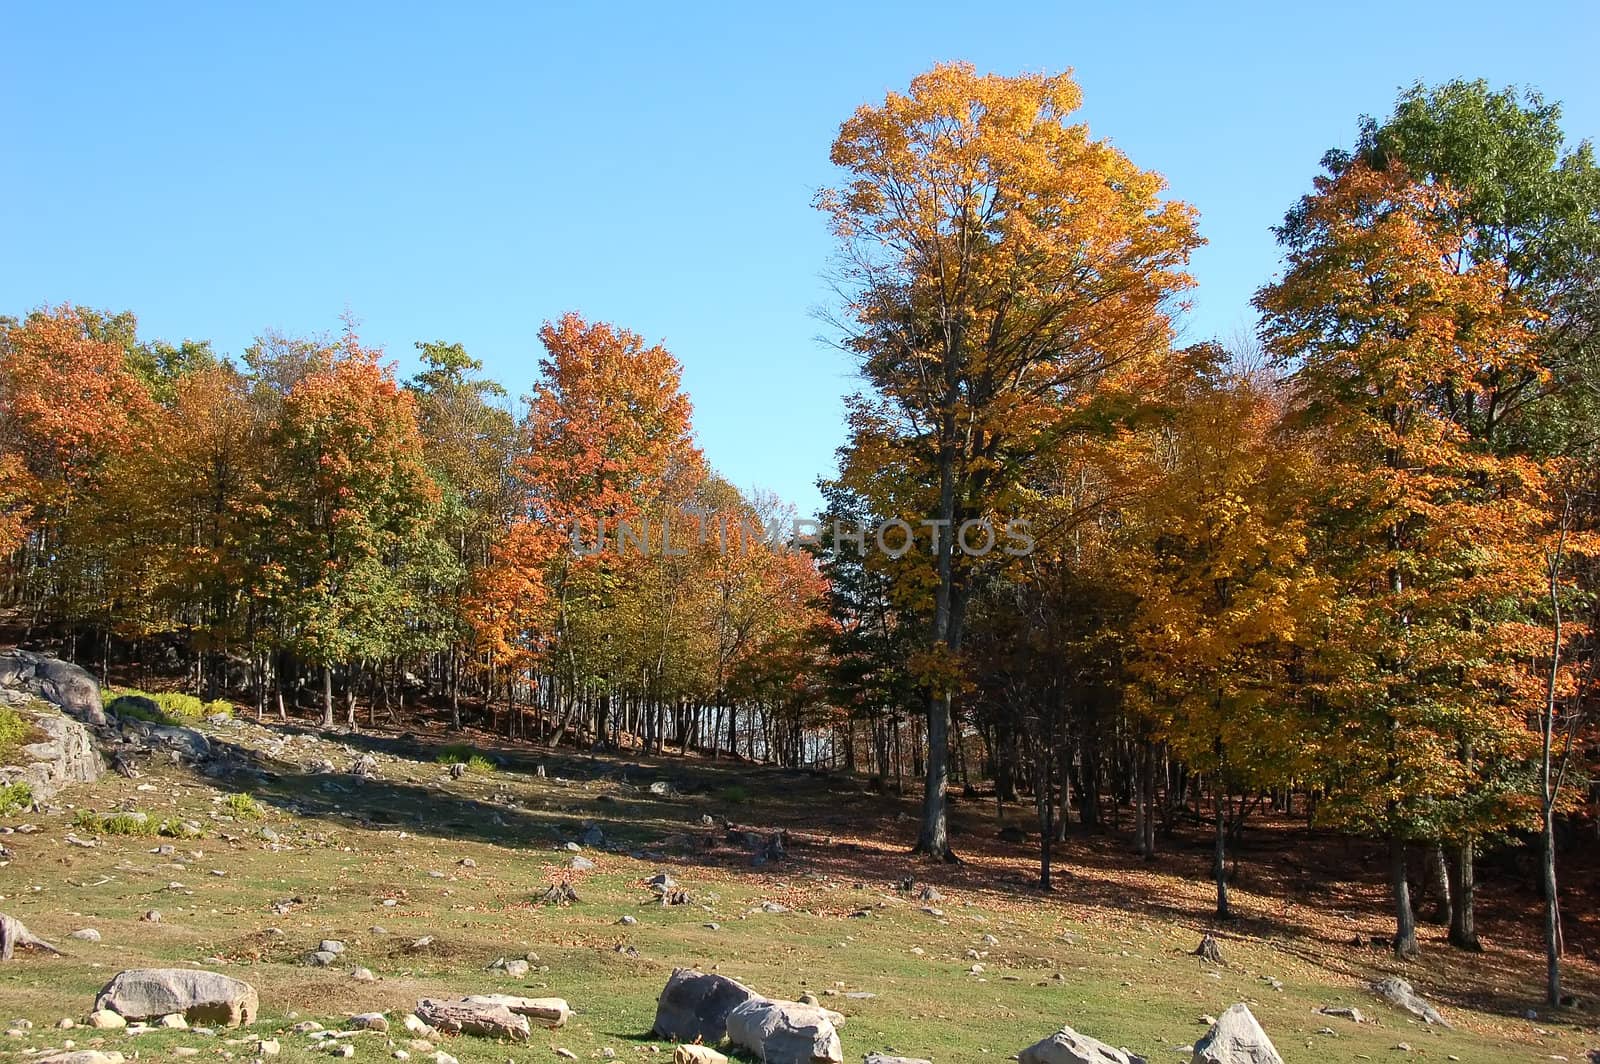 A beautiful fall landscape with a bright blue sky